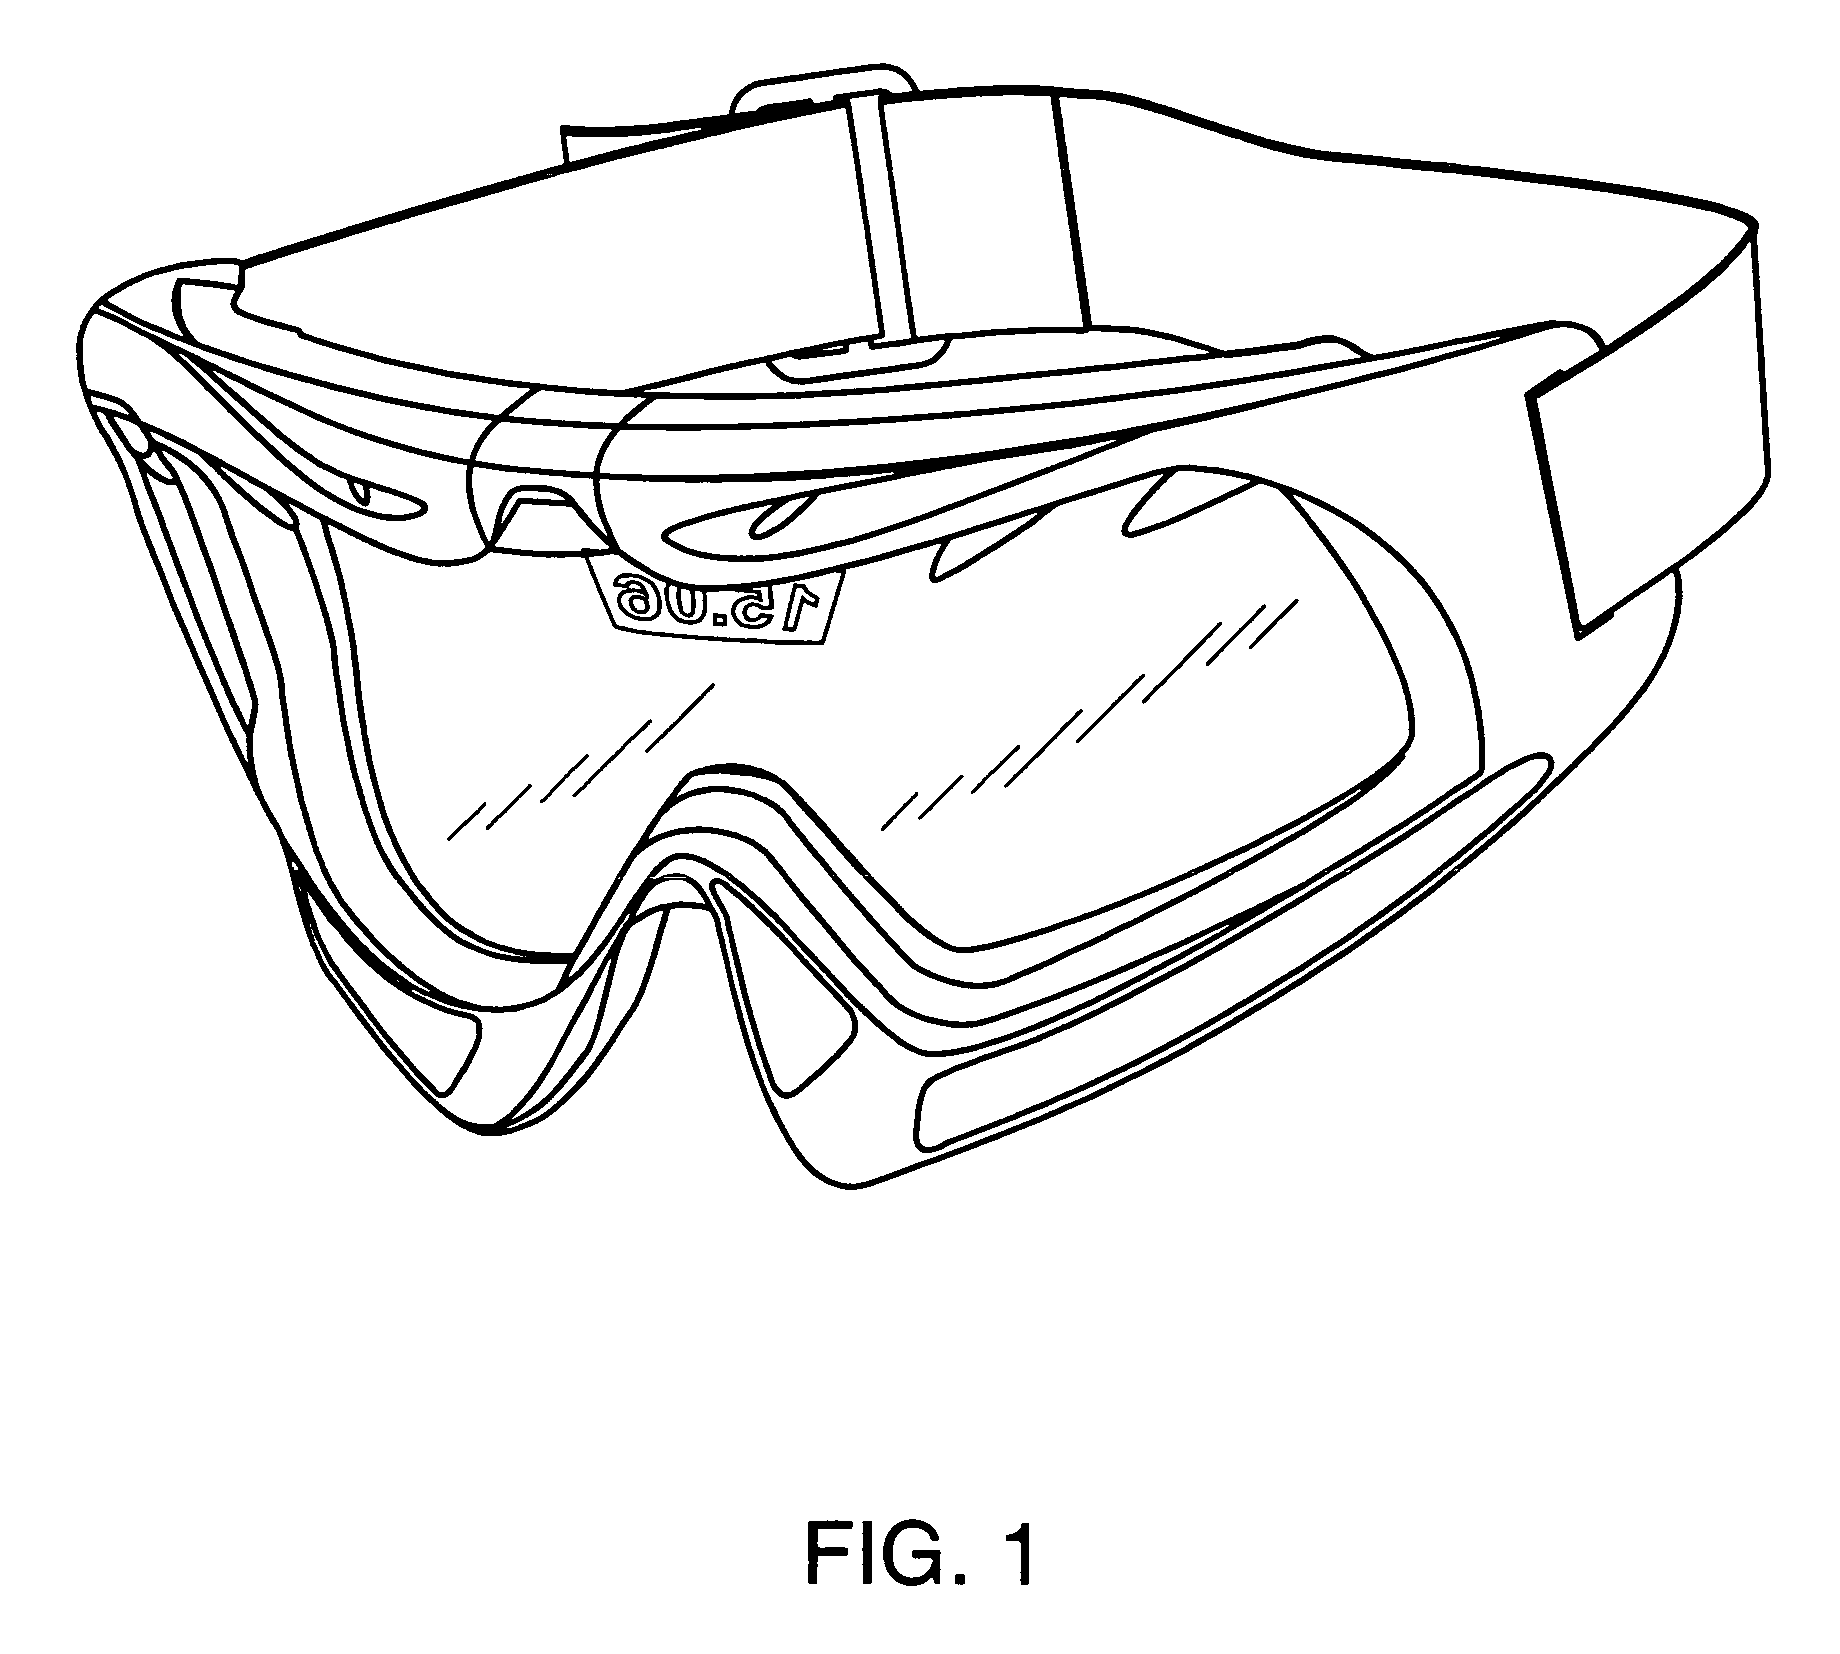 Eyewear with an image projected off of an unassisted eyewear lens to the user